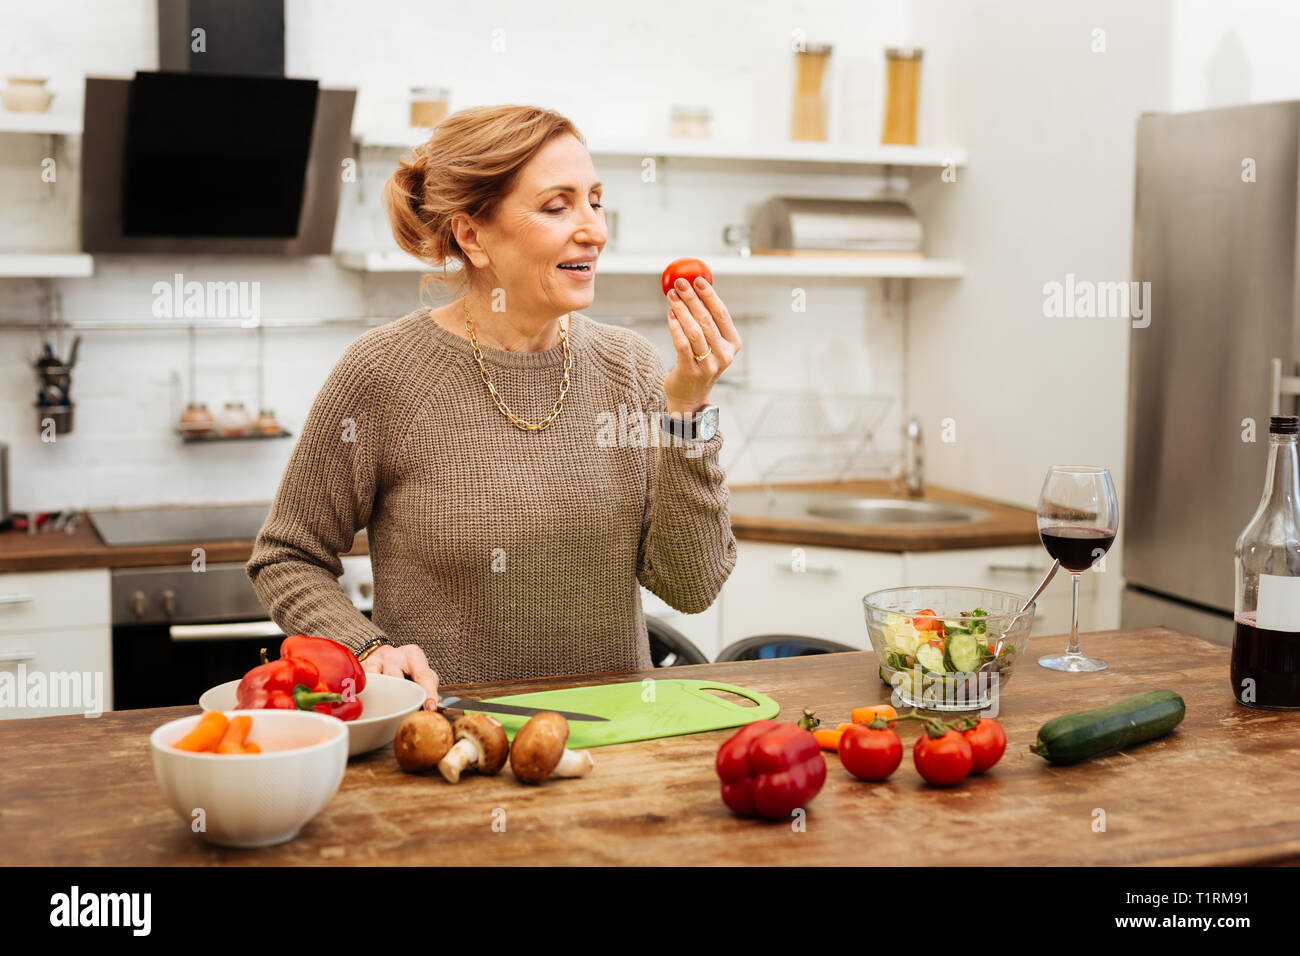 Positive woman with tied hair observing tomato in her hand Stock Photo